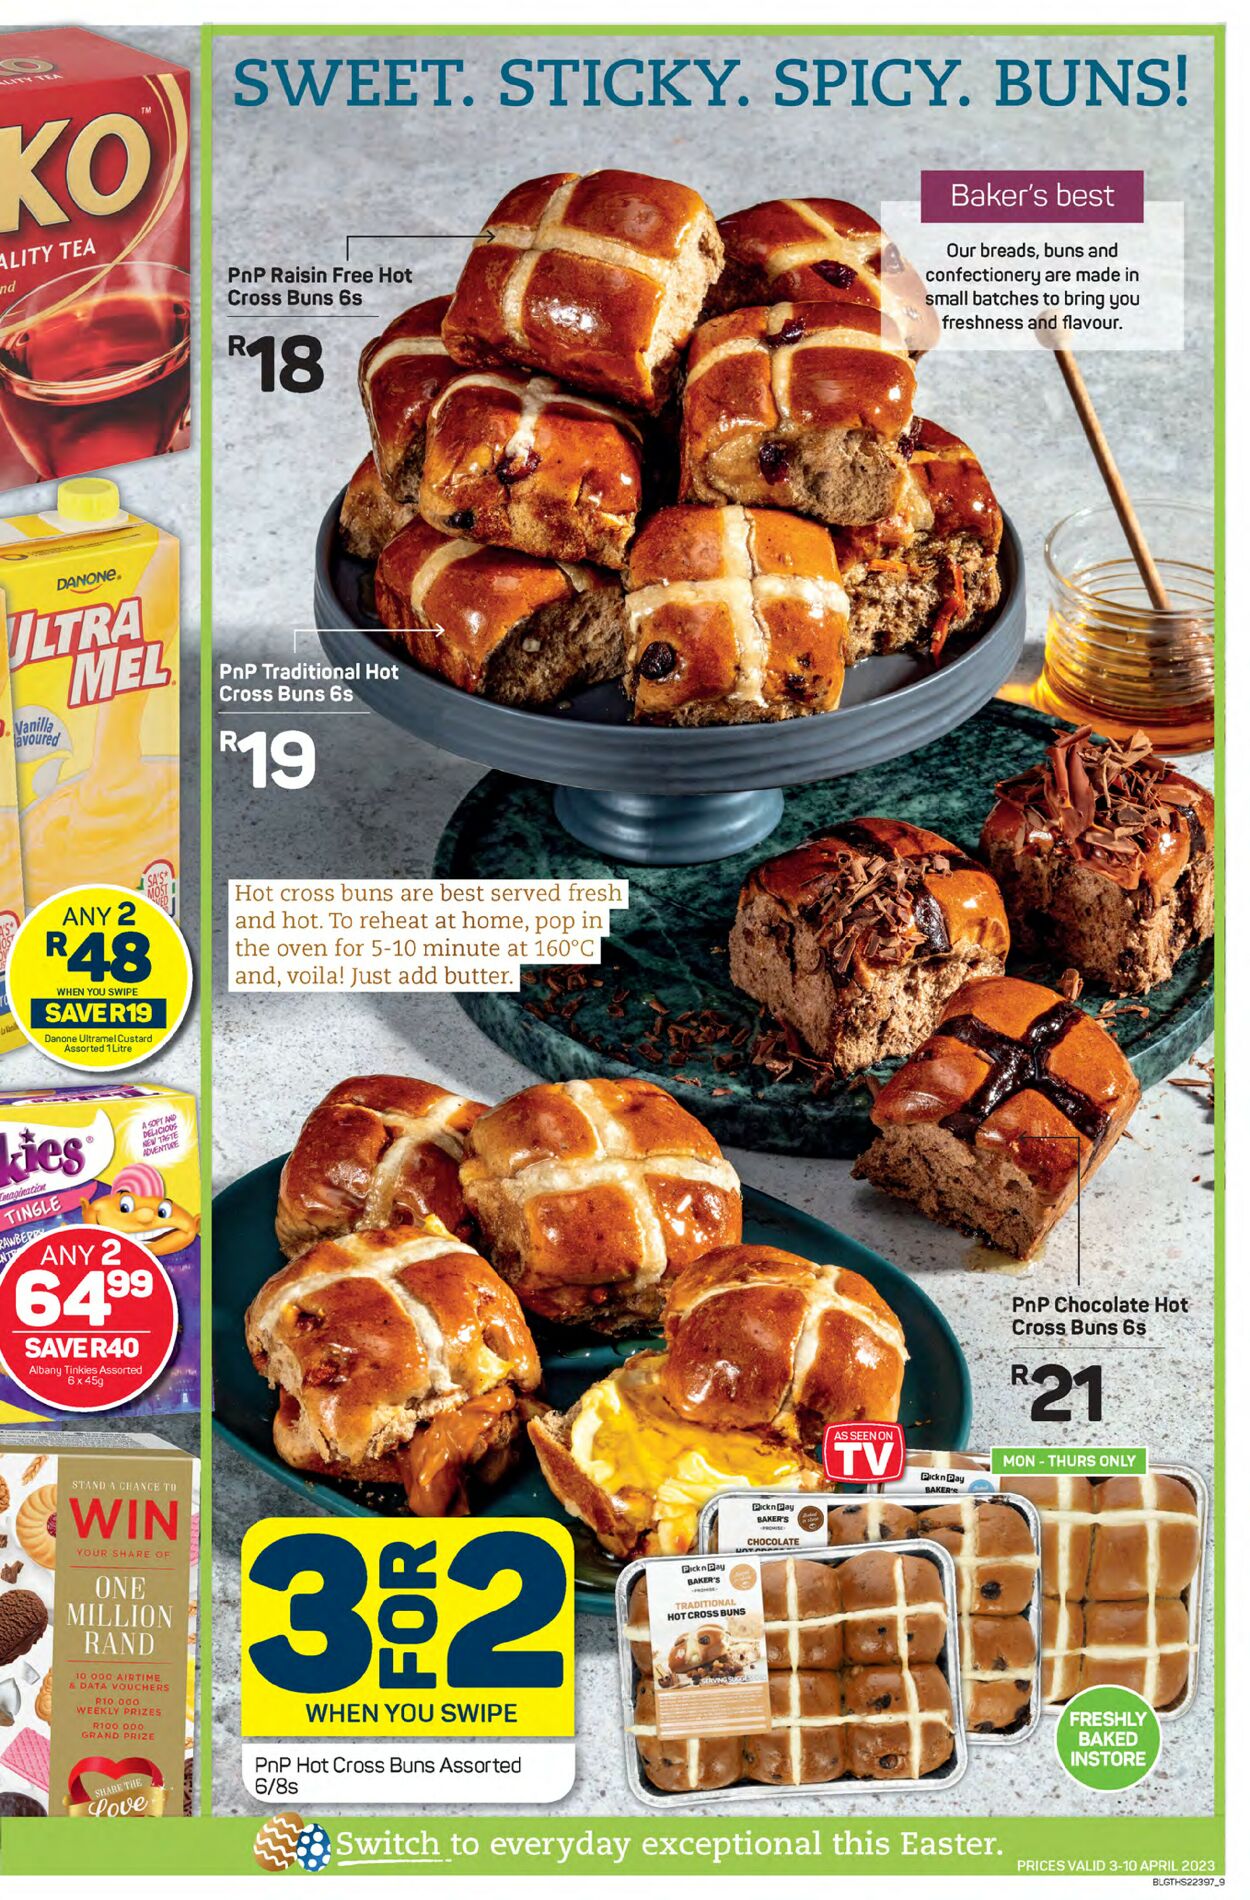 Pick n Pay Catalogue - 2023/04/03-2023/04/10 (Page 9)